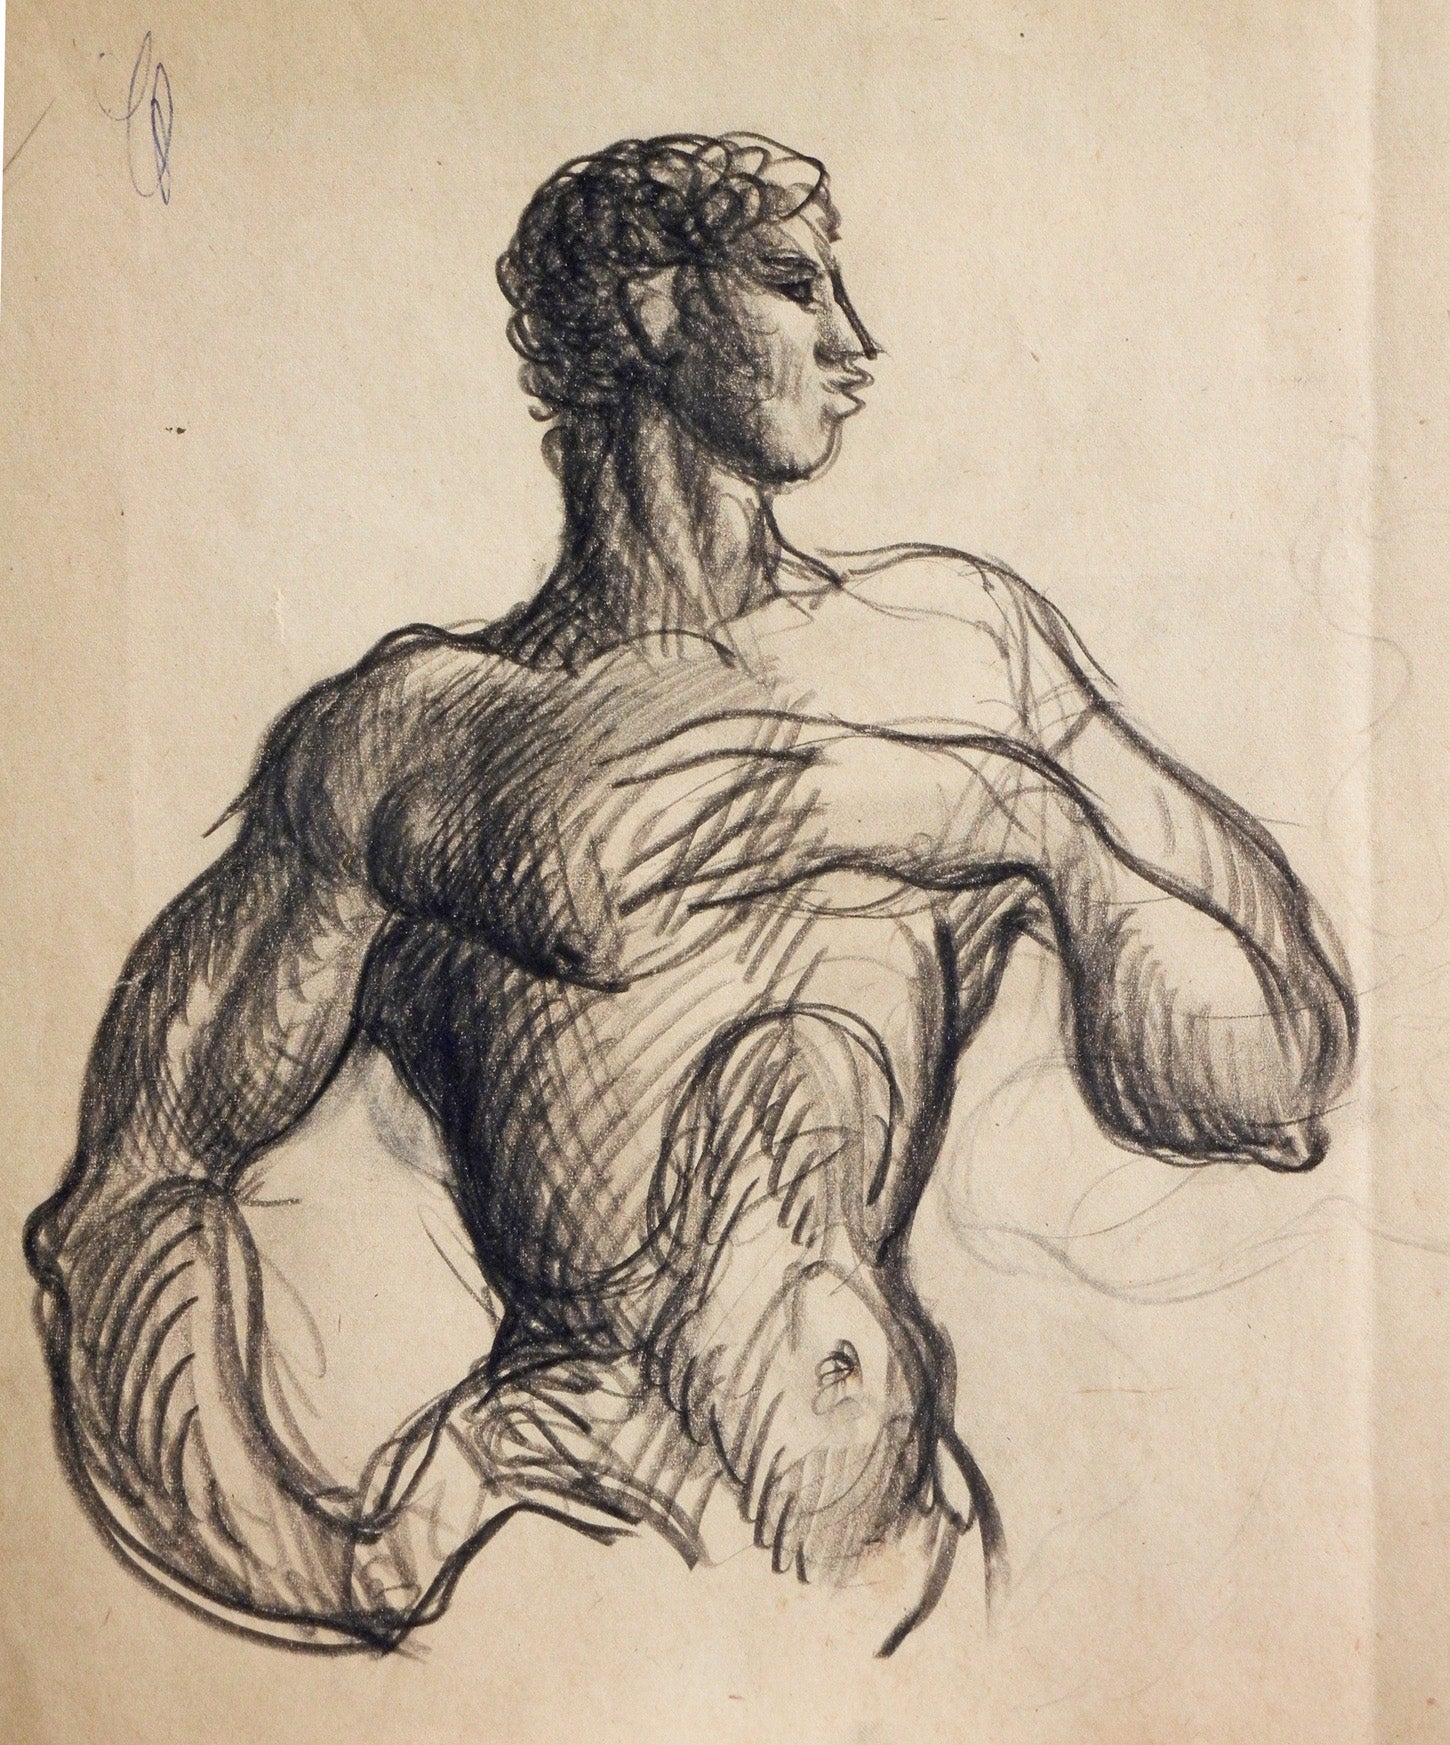 "Nude Male with Hand to Chest, " Drawing by Raoul du Bois